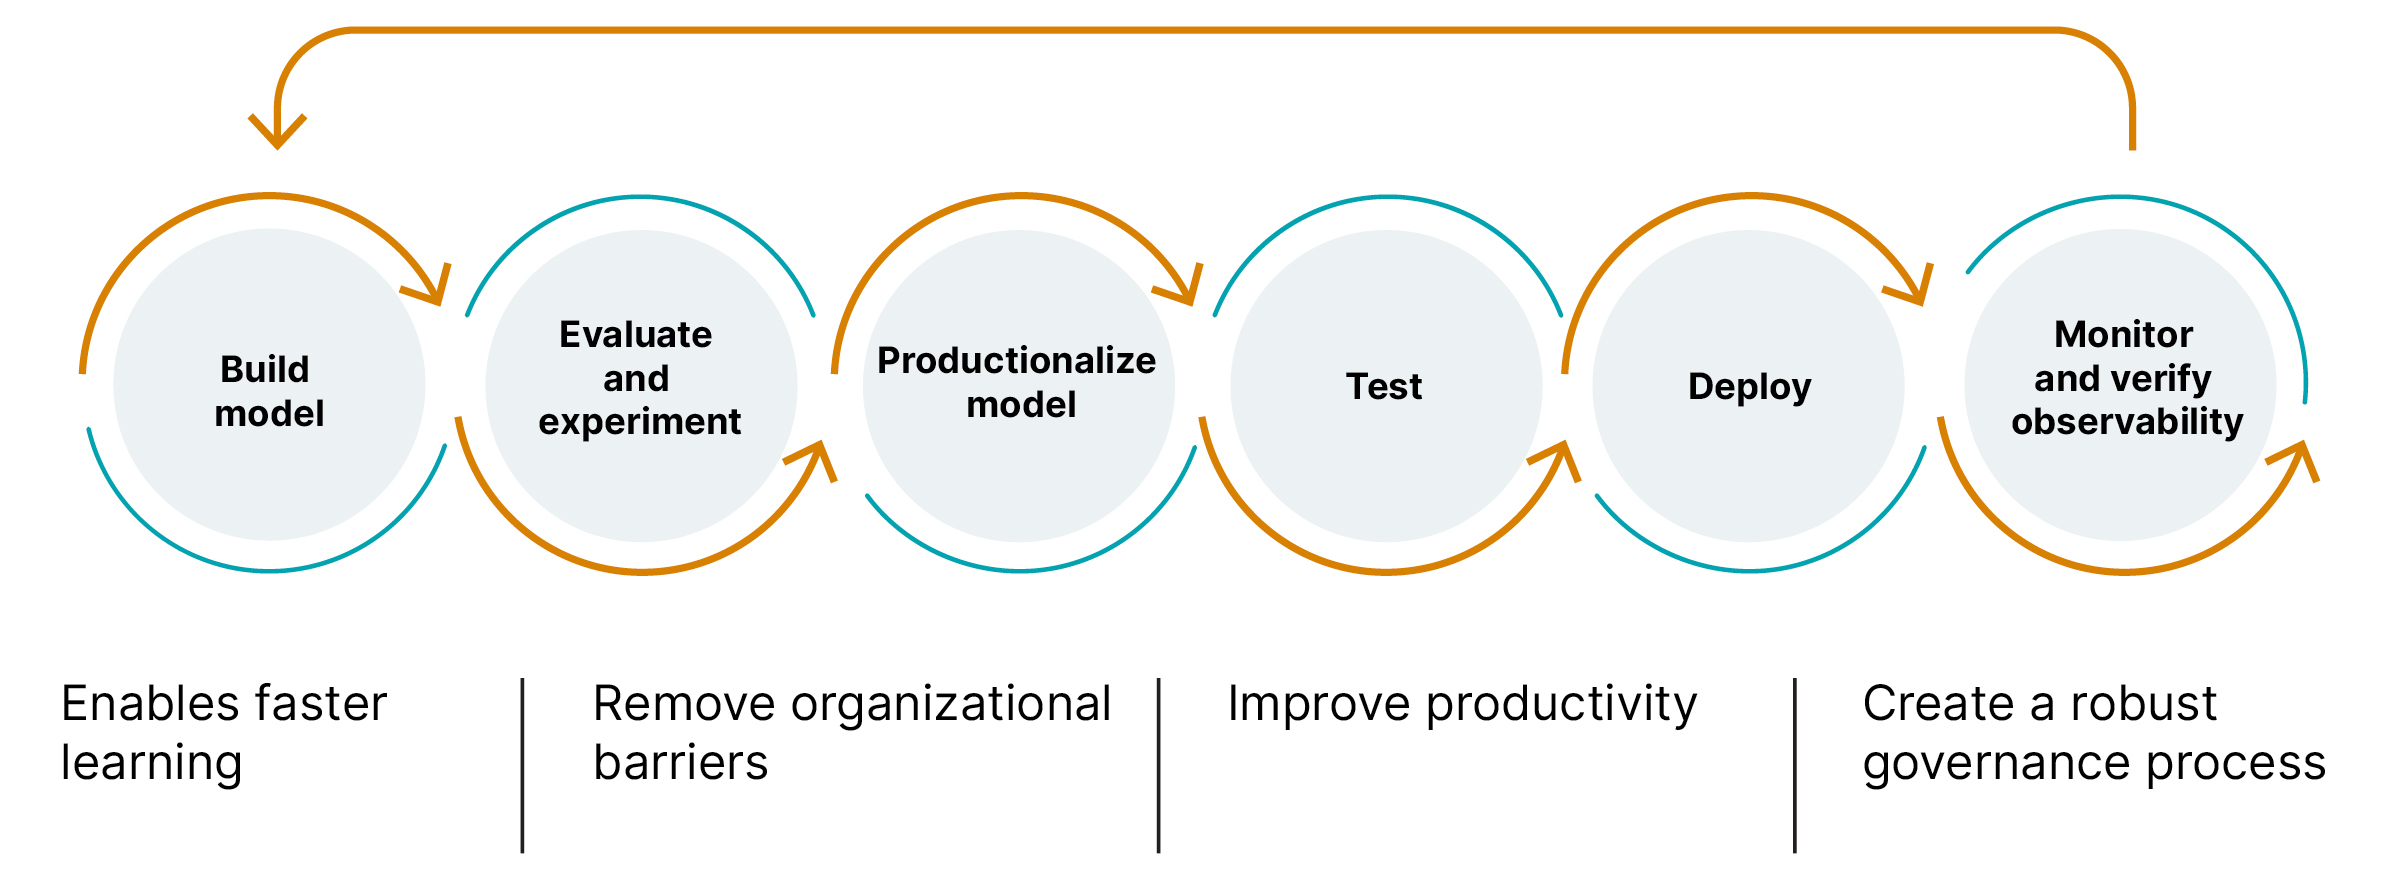 Diagram of the benefits of  AI continuous delivery practices. Among the implementation steps we find: Build model, evaluate and experiment, productionalize model, test, deploy and monitor and verify observability. The benefits found are: Enables faster learning, remove organizational barriers, improve productivity and creates a robust governance process.